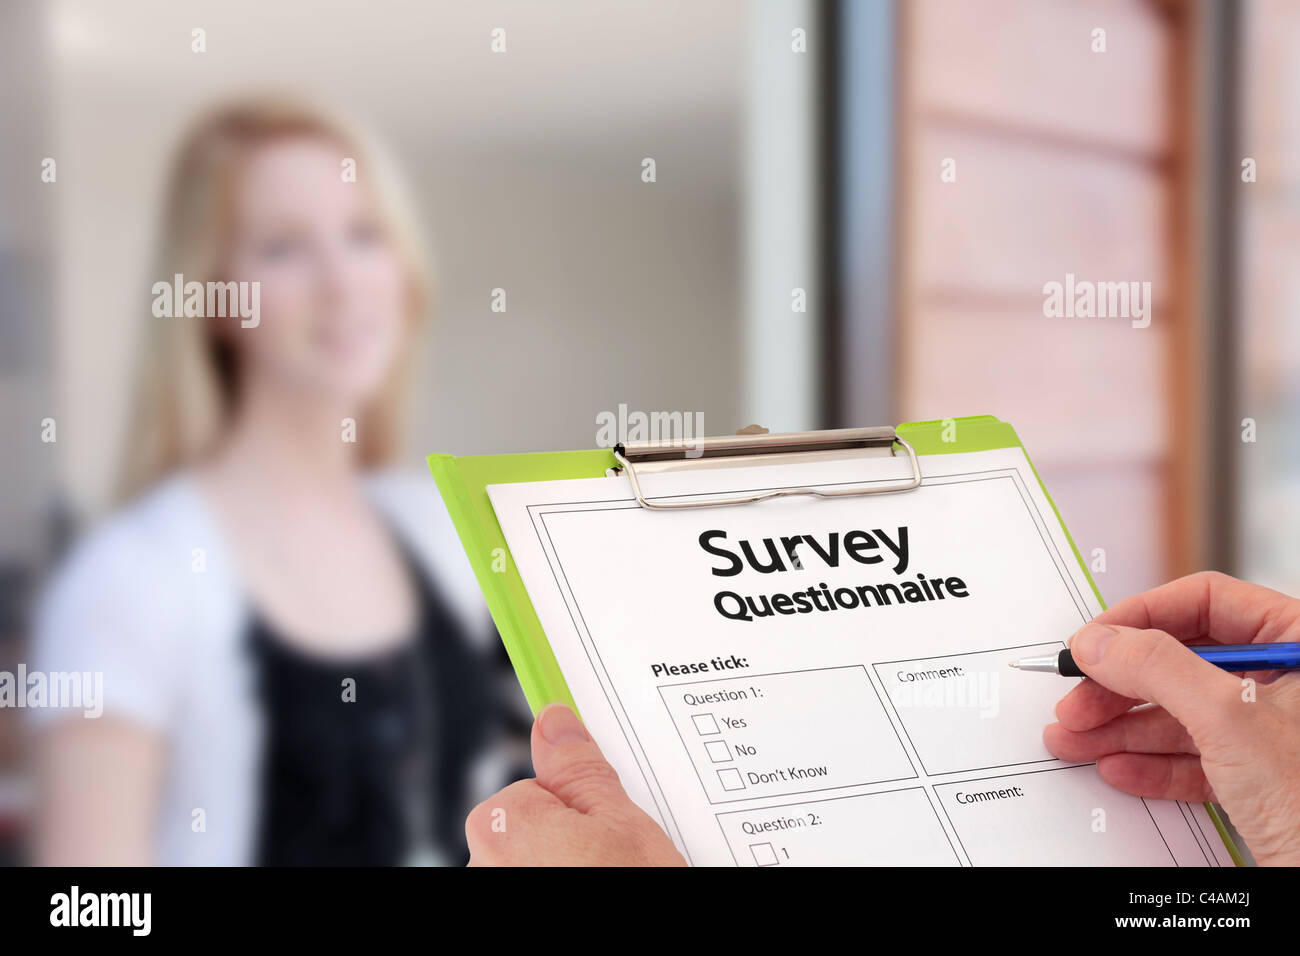 Girl Answering Market Research Survey Questionnaire at the Door Stock Photo